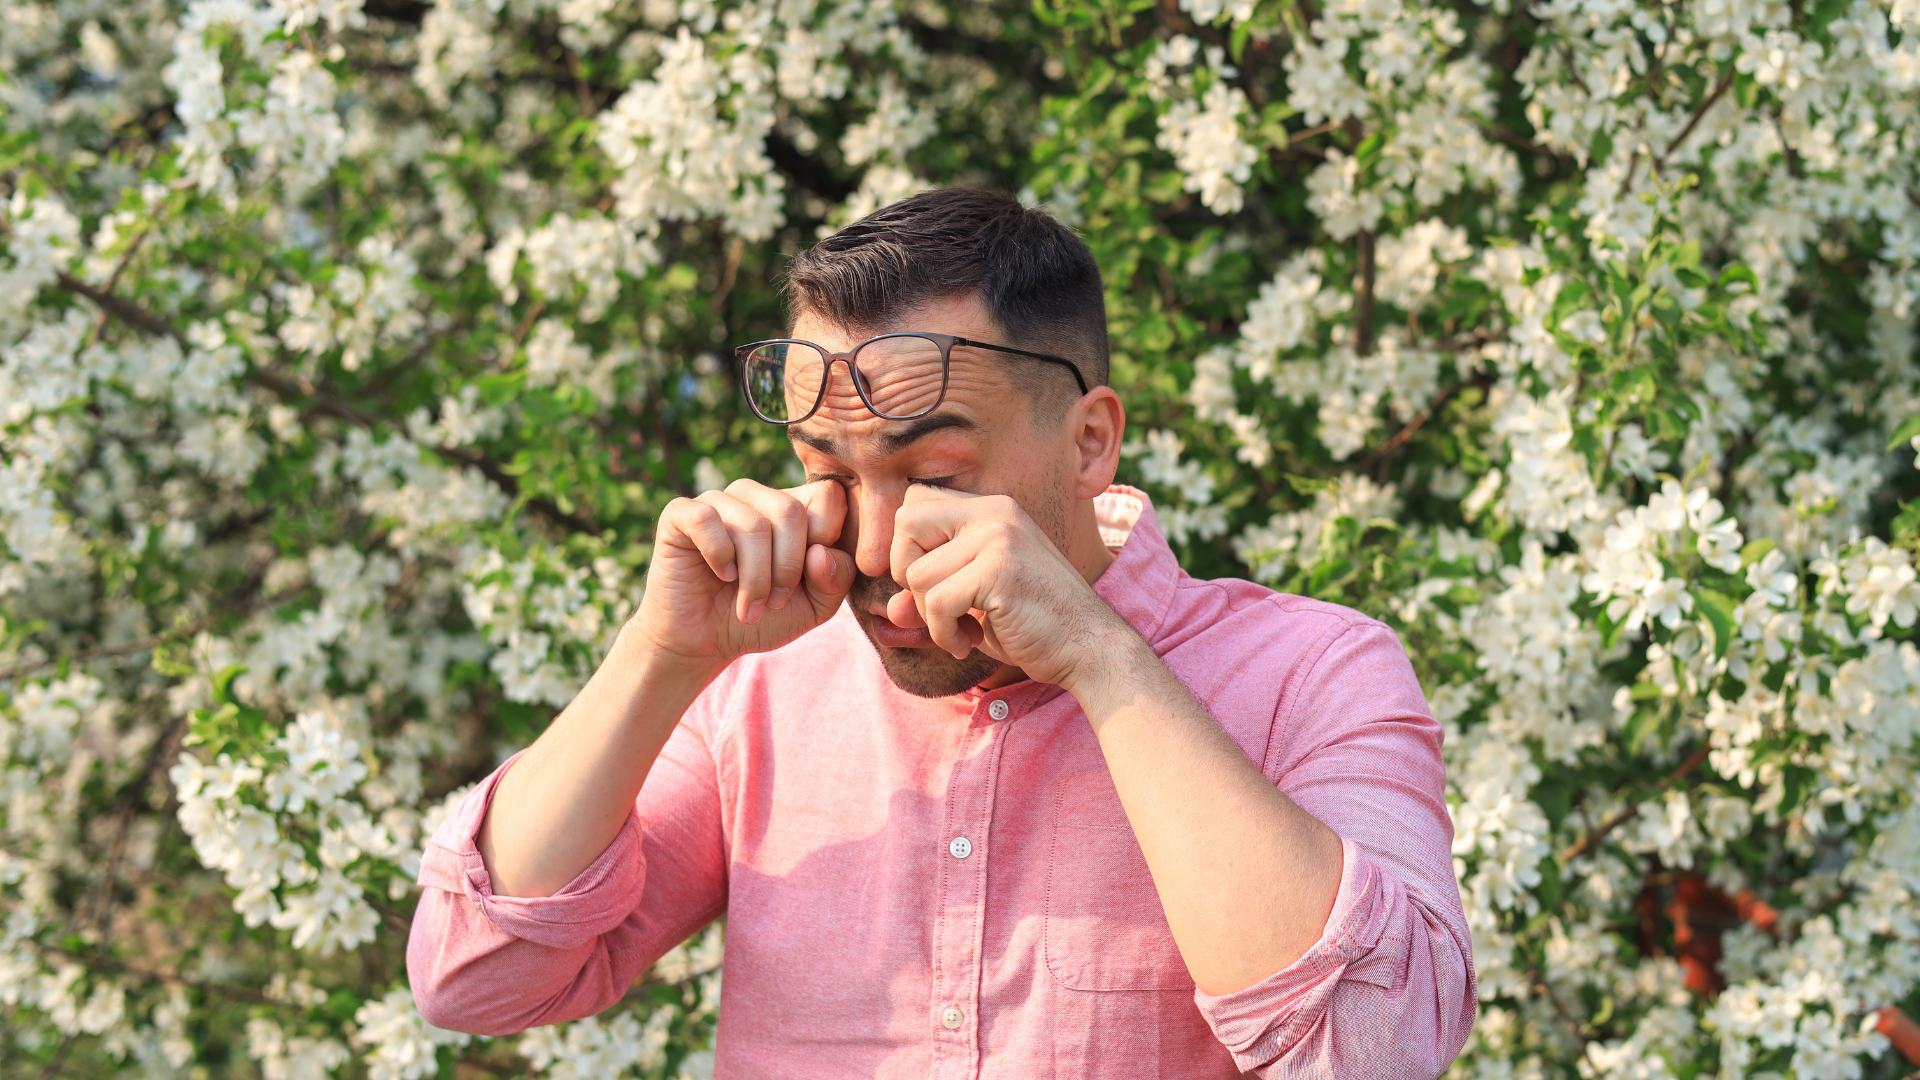 A man standing outside surrounded by flowers rubbing his eyes due to allergies.